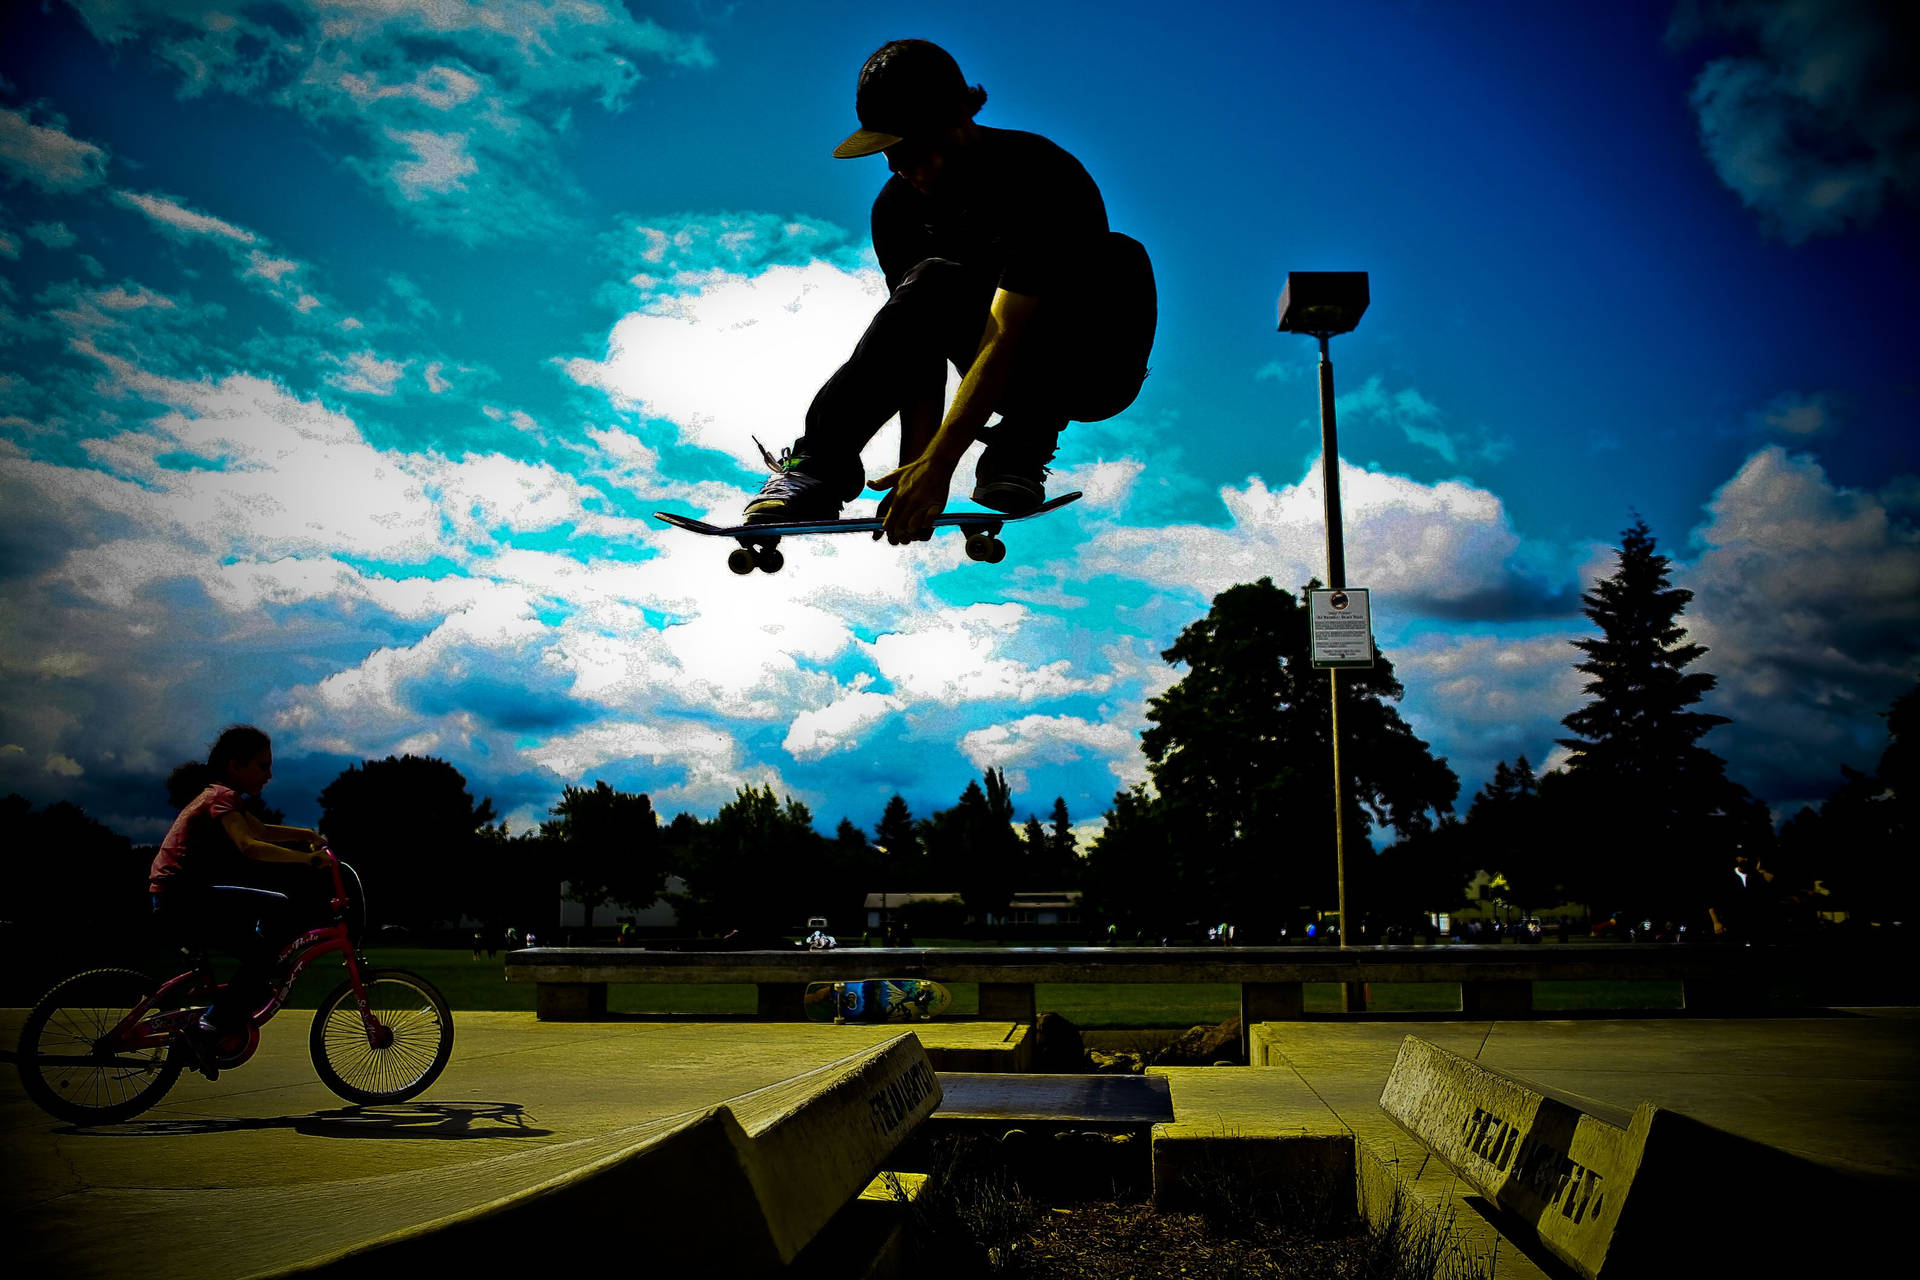 Skateboard Silhouette Performance Photography